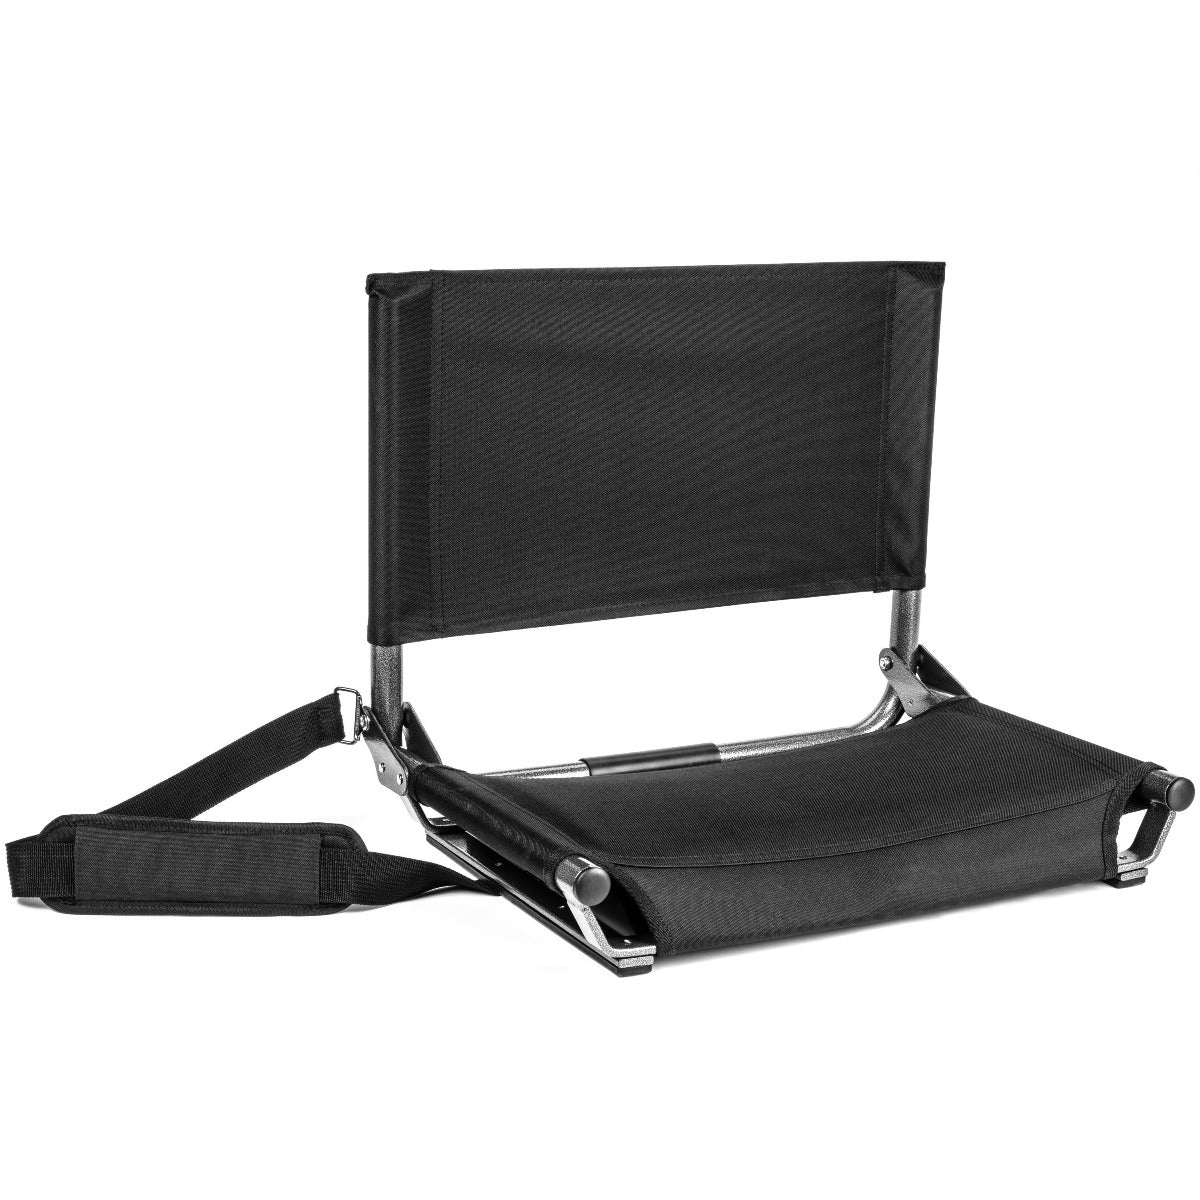 The Stadium Chair Co. Deluxe Wide Model Stadium Chair, Black